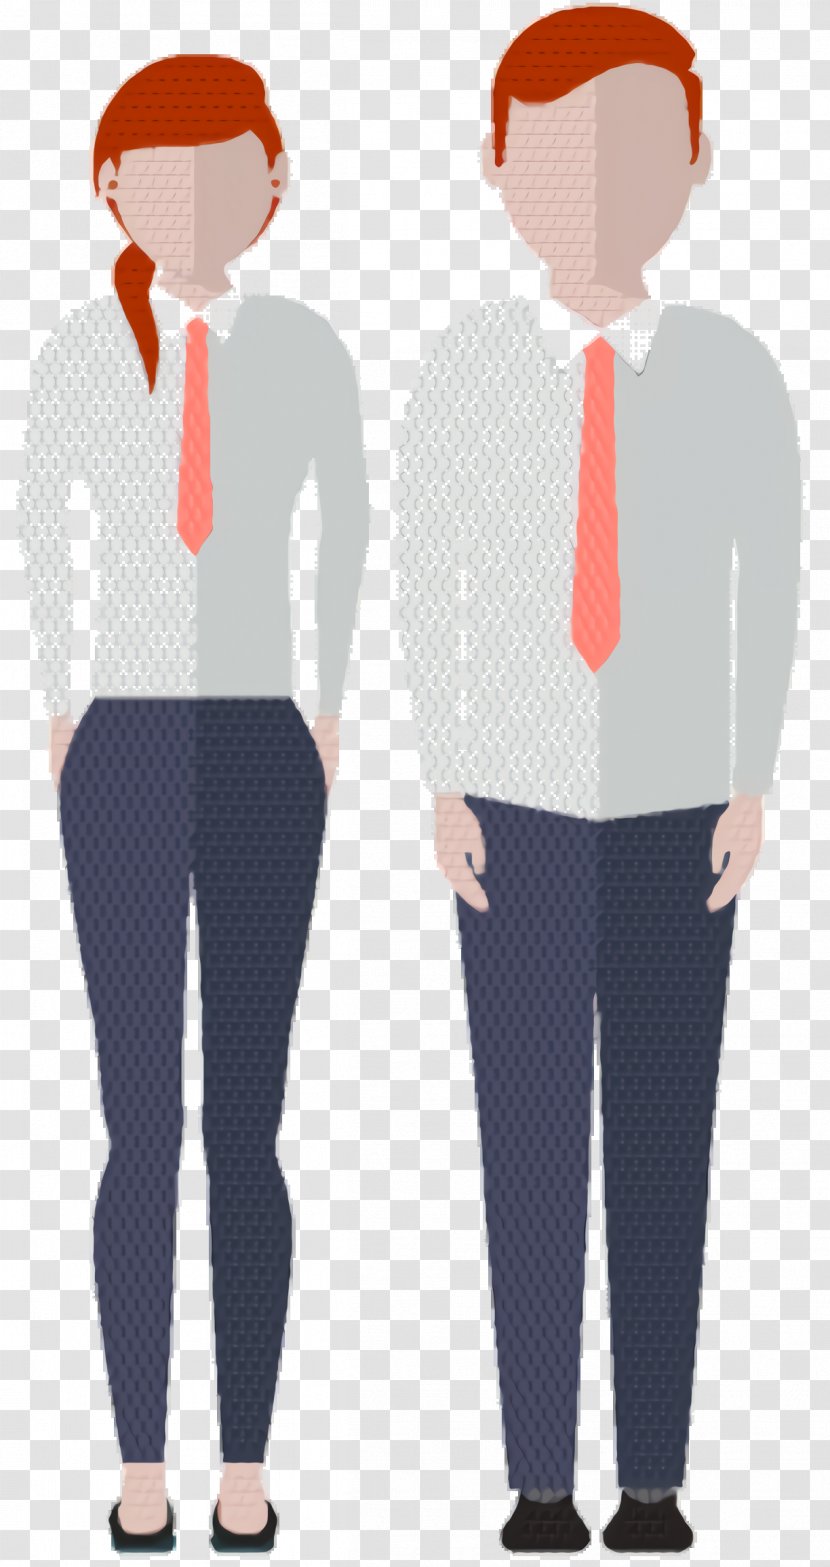 Tshirt Clothing - Neck - Tie Formal Wear Transparent PNG